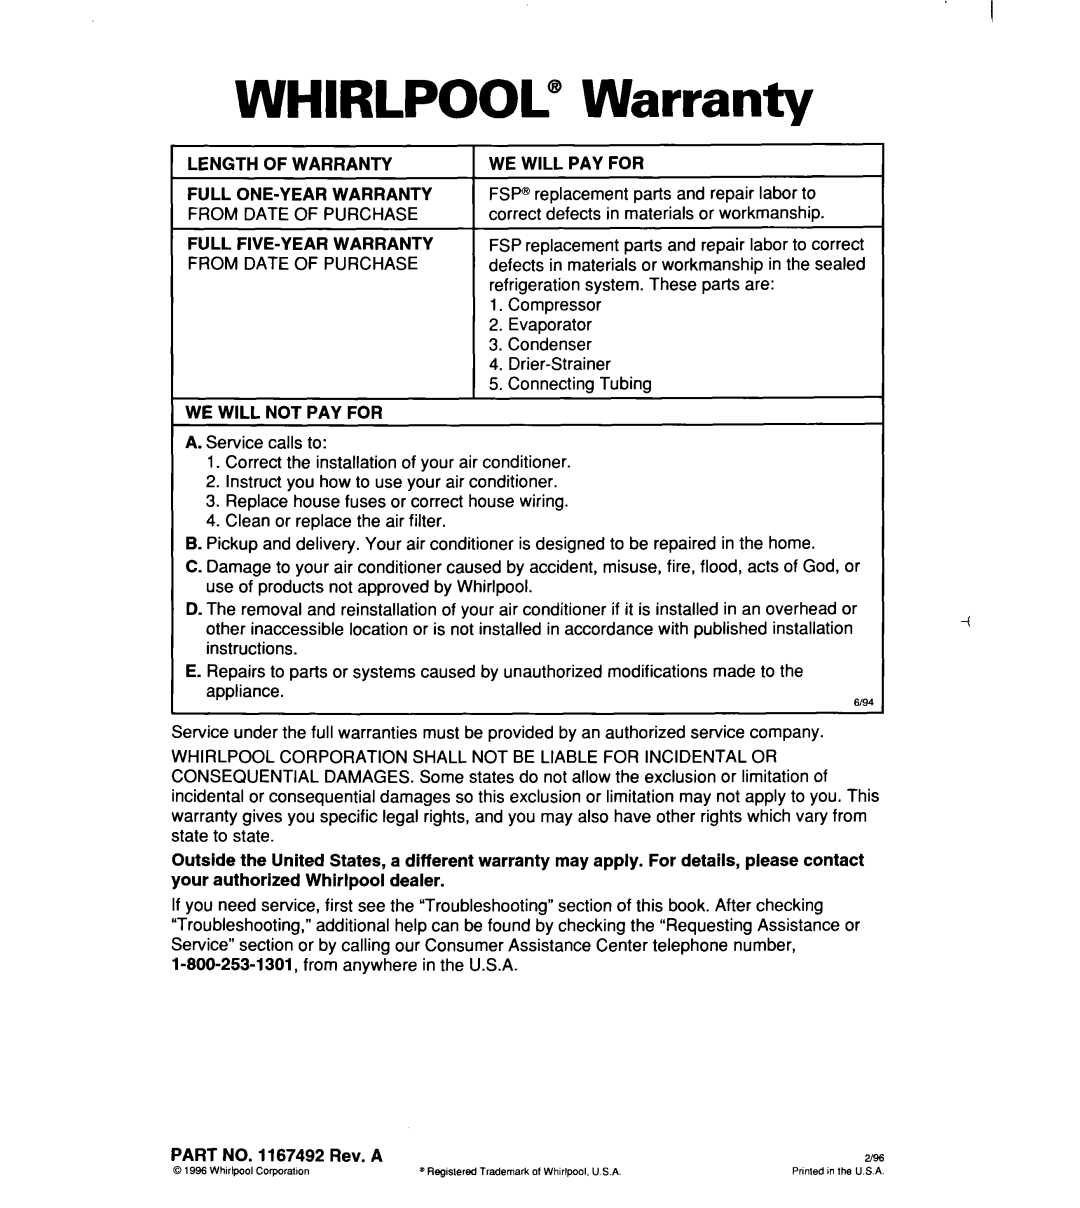 Whirlpool ACM244XE0, ACM 152XE0, ACM184XE0 important safety instructions WHIRLPOOL@ Warranty 